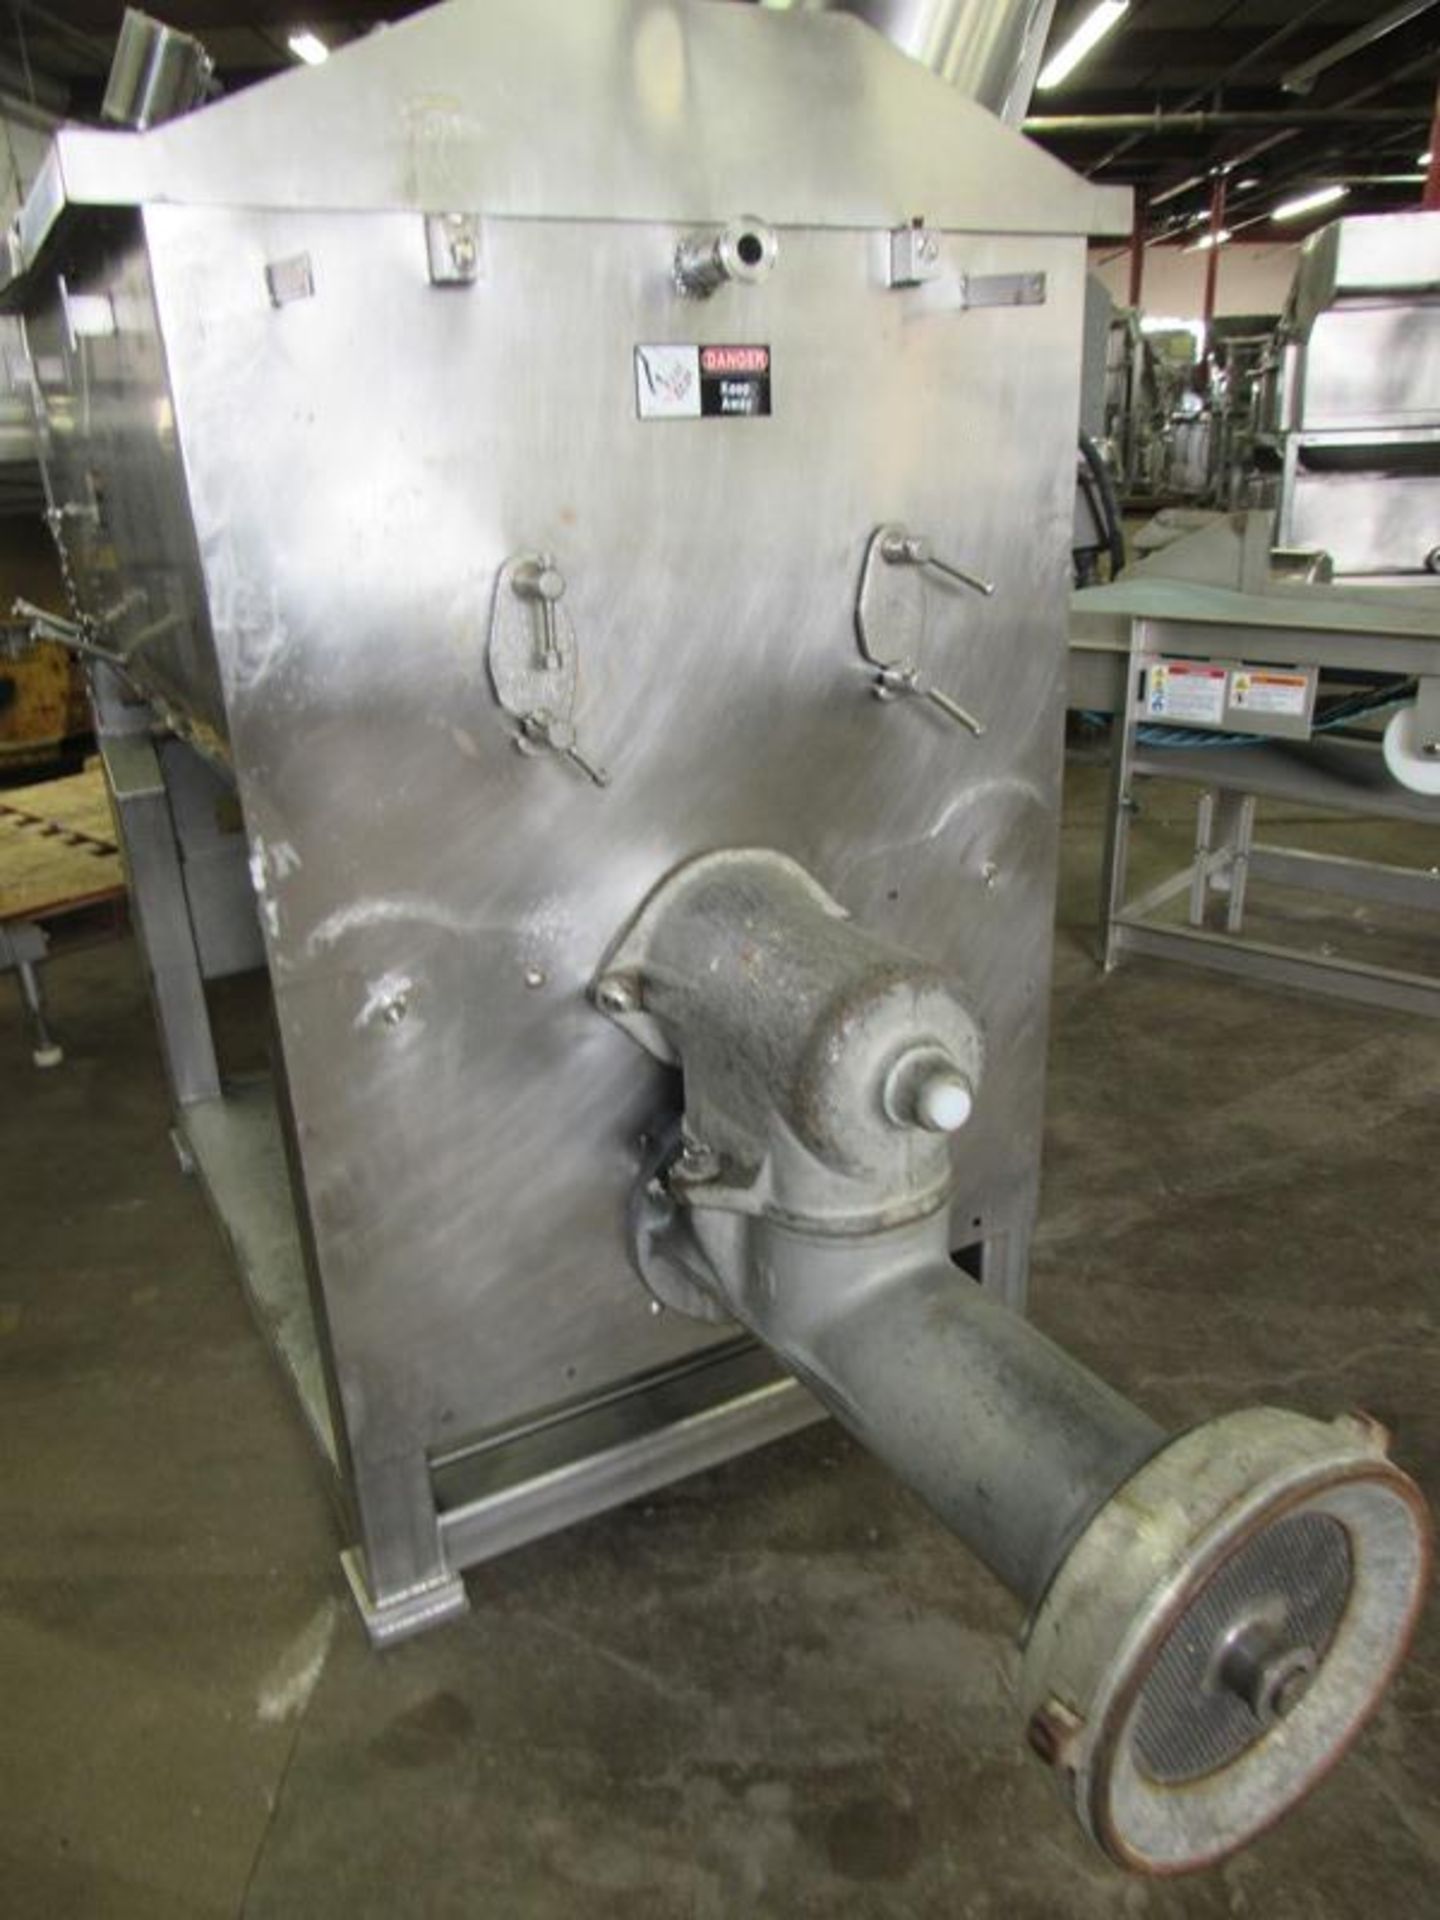 Hobart Mdl. 4356G Stainless Steel Mixer/Grinder, Ser. #163132, 33" W X 46" L X 24" D tub, 2nd - Image 4 of 7